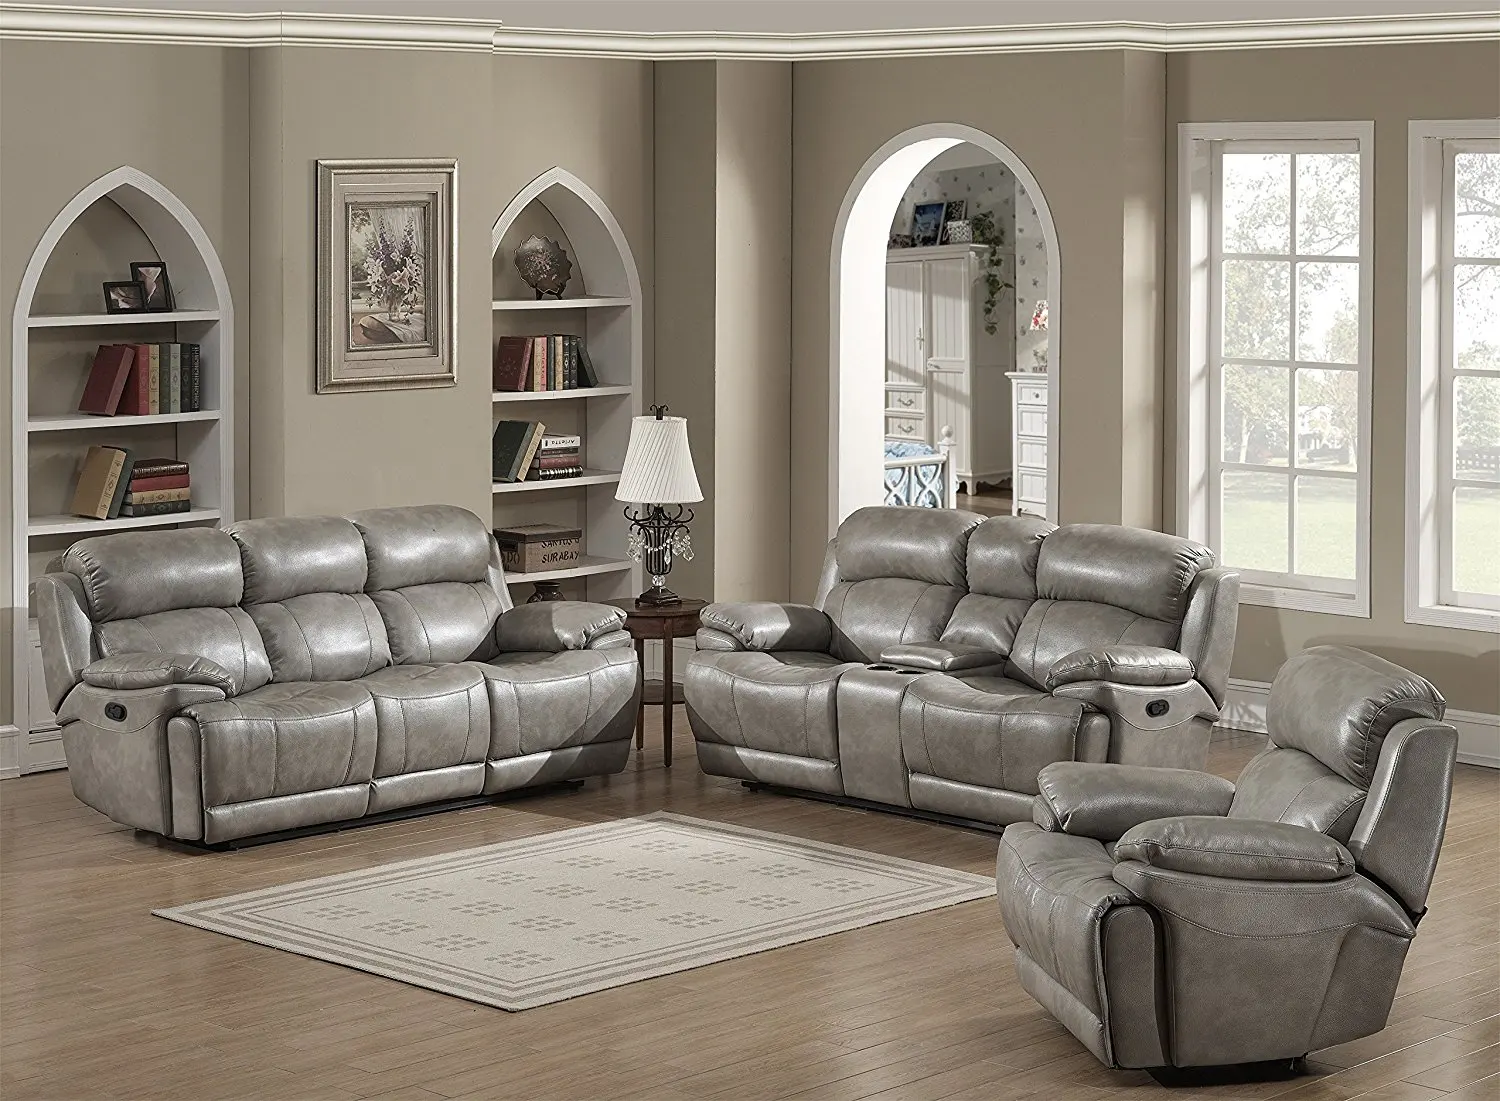 Cheap 3 Piece Leather Living Room Set, find 3 Piece Leather Living Room